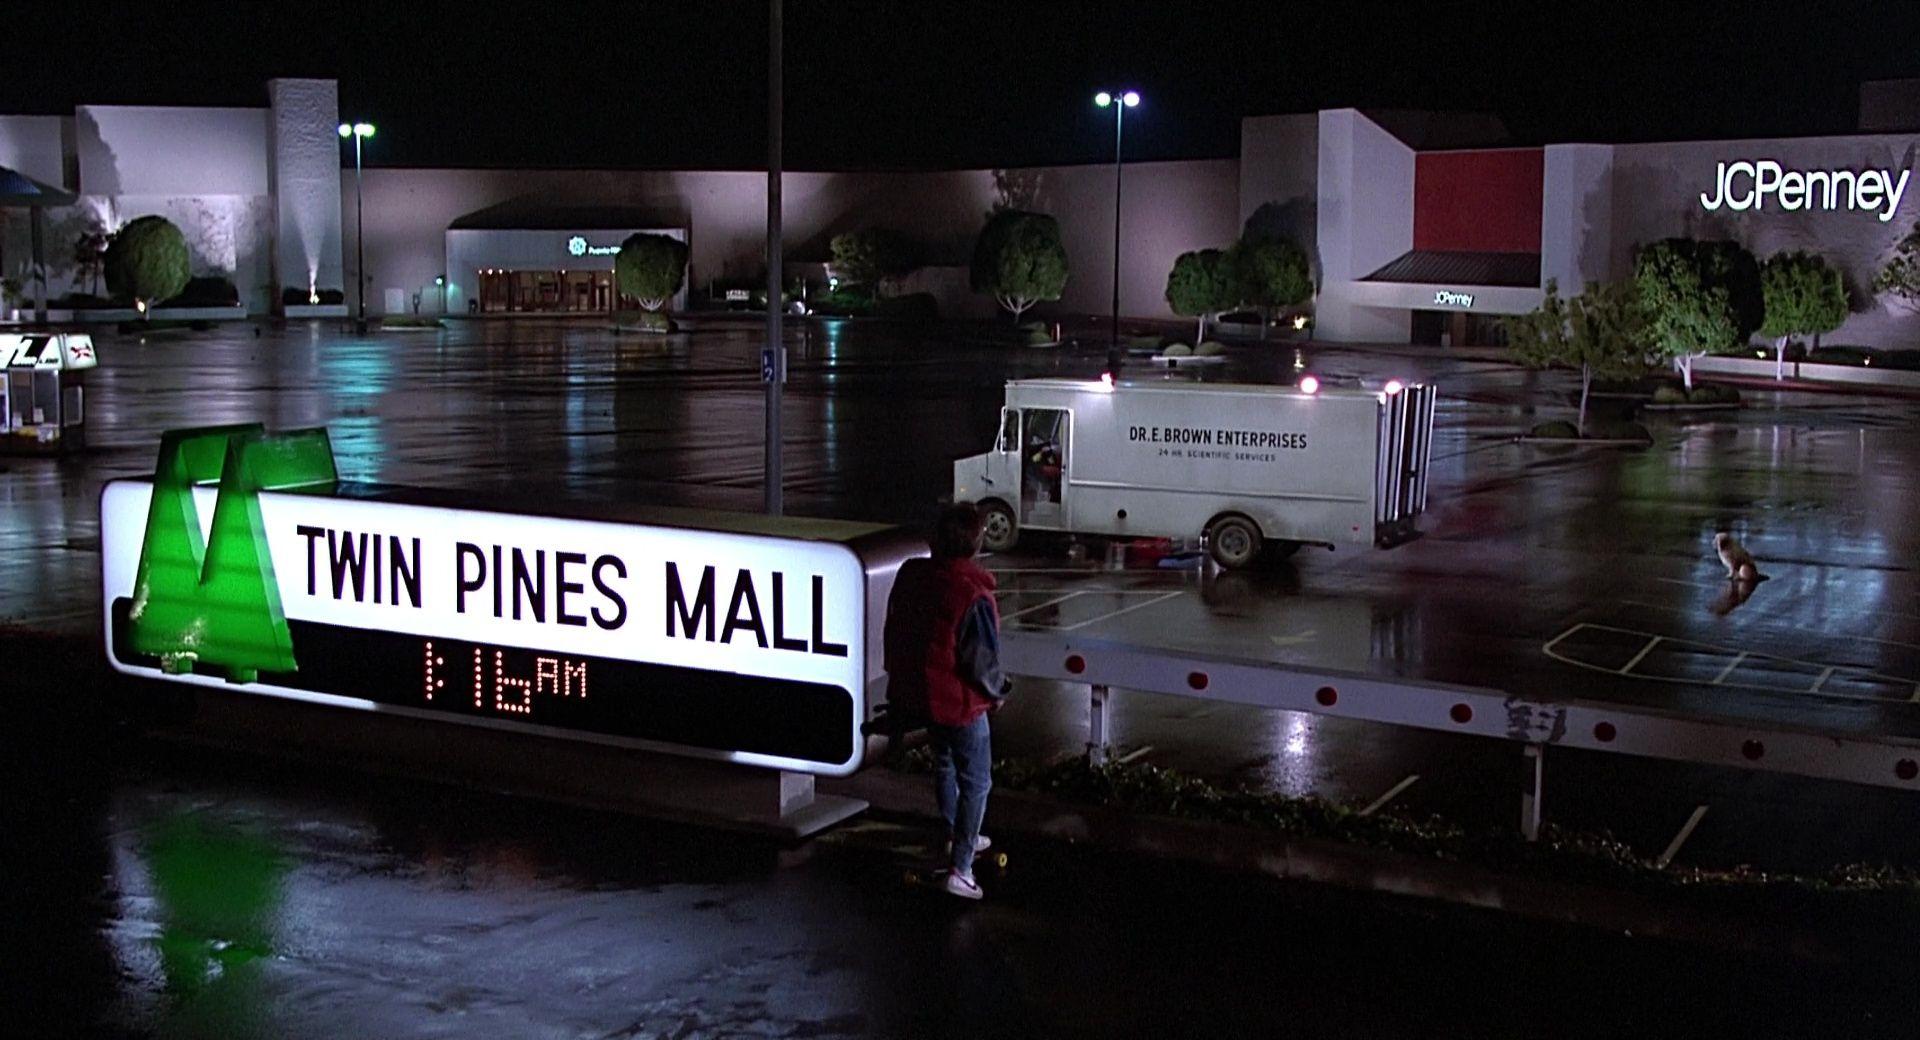 1985 JCPenney Logo - JCPenney Store in Back to the Future (1985) Movie